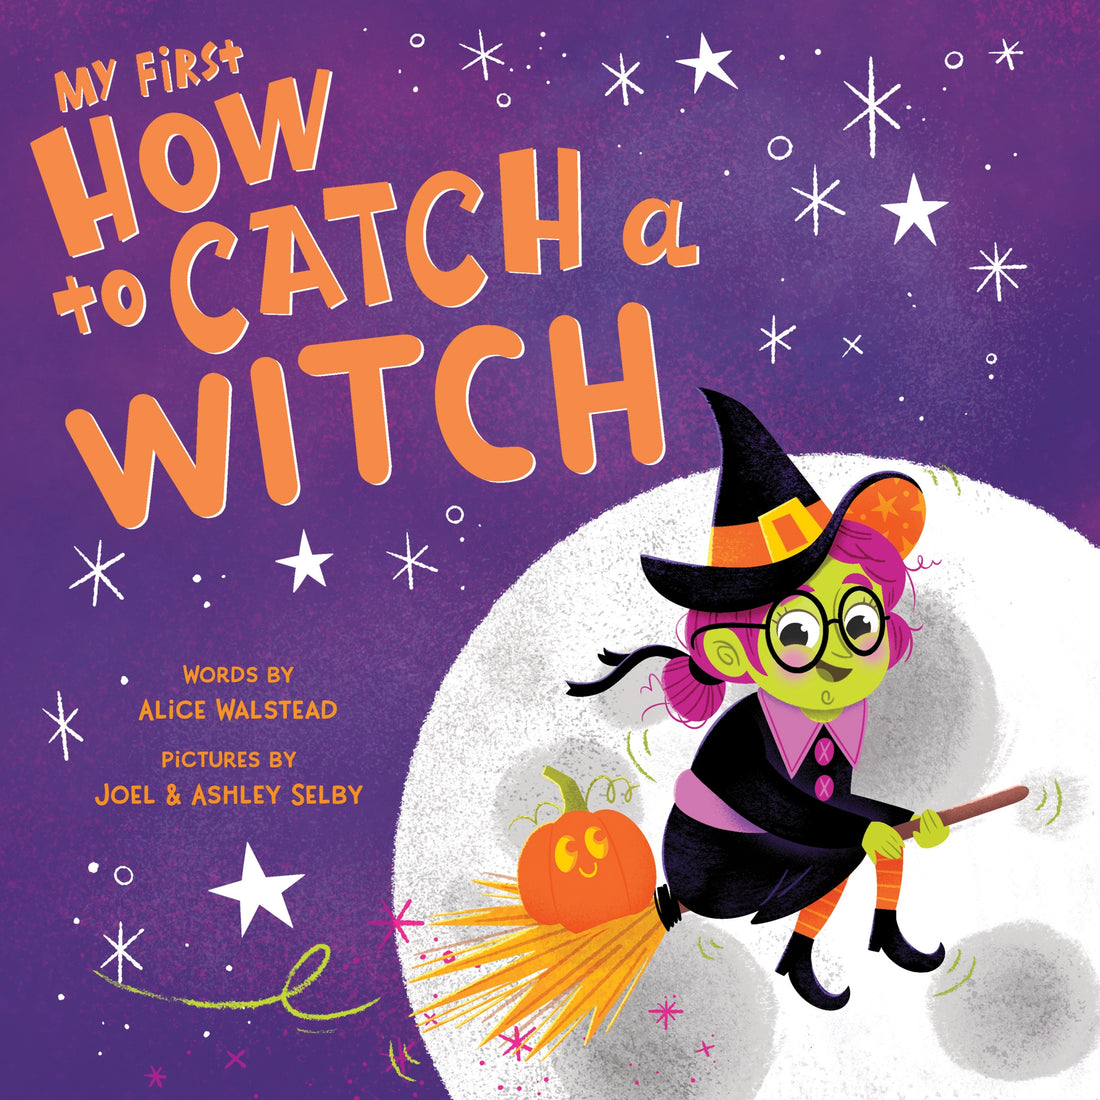 My First How To Catch a Witch